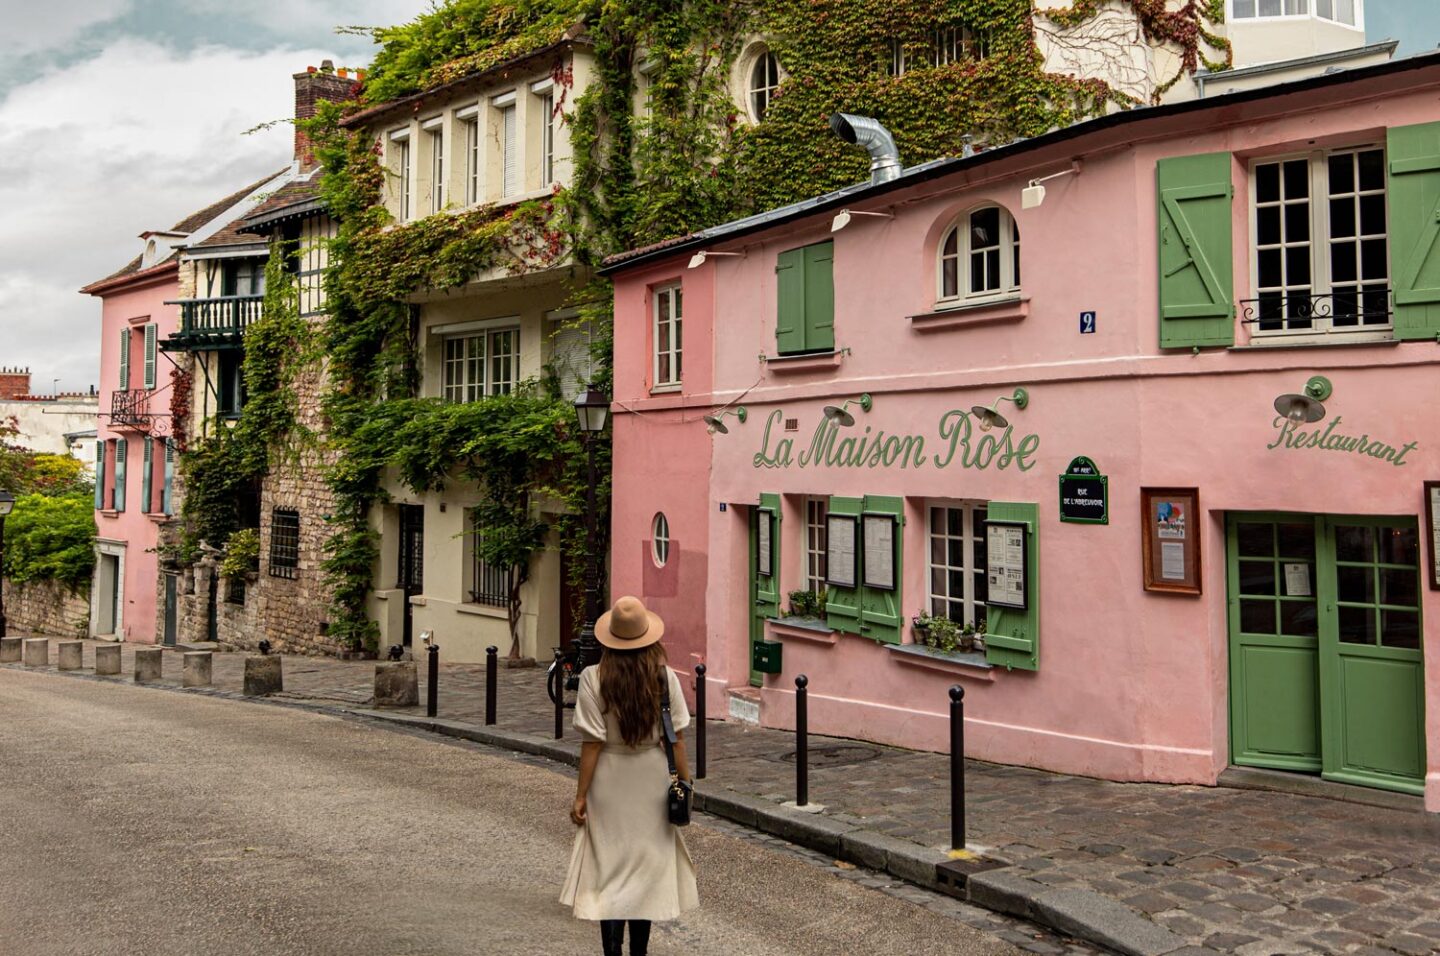 A woman wearing a beige dress and hat walks down a charming, cobblestone street in Paris, approaching the iconic La Maison Rose restaurant. The building features a distinctive pink facade with green shutters, adorned with ivy and plants. The street is lined with other picturesque buildings, creating a quaint and picturesque scene perfect for capturing the essence of Parisian charm.